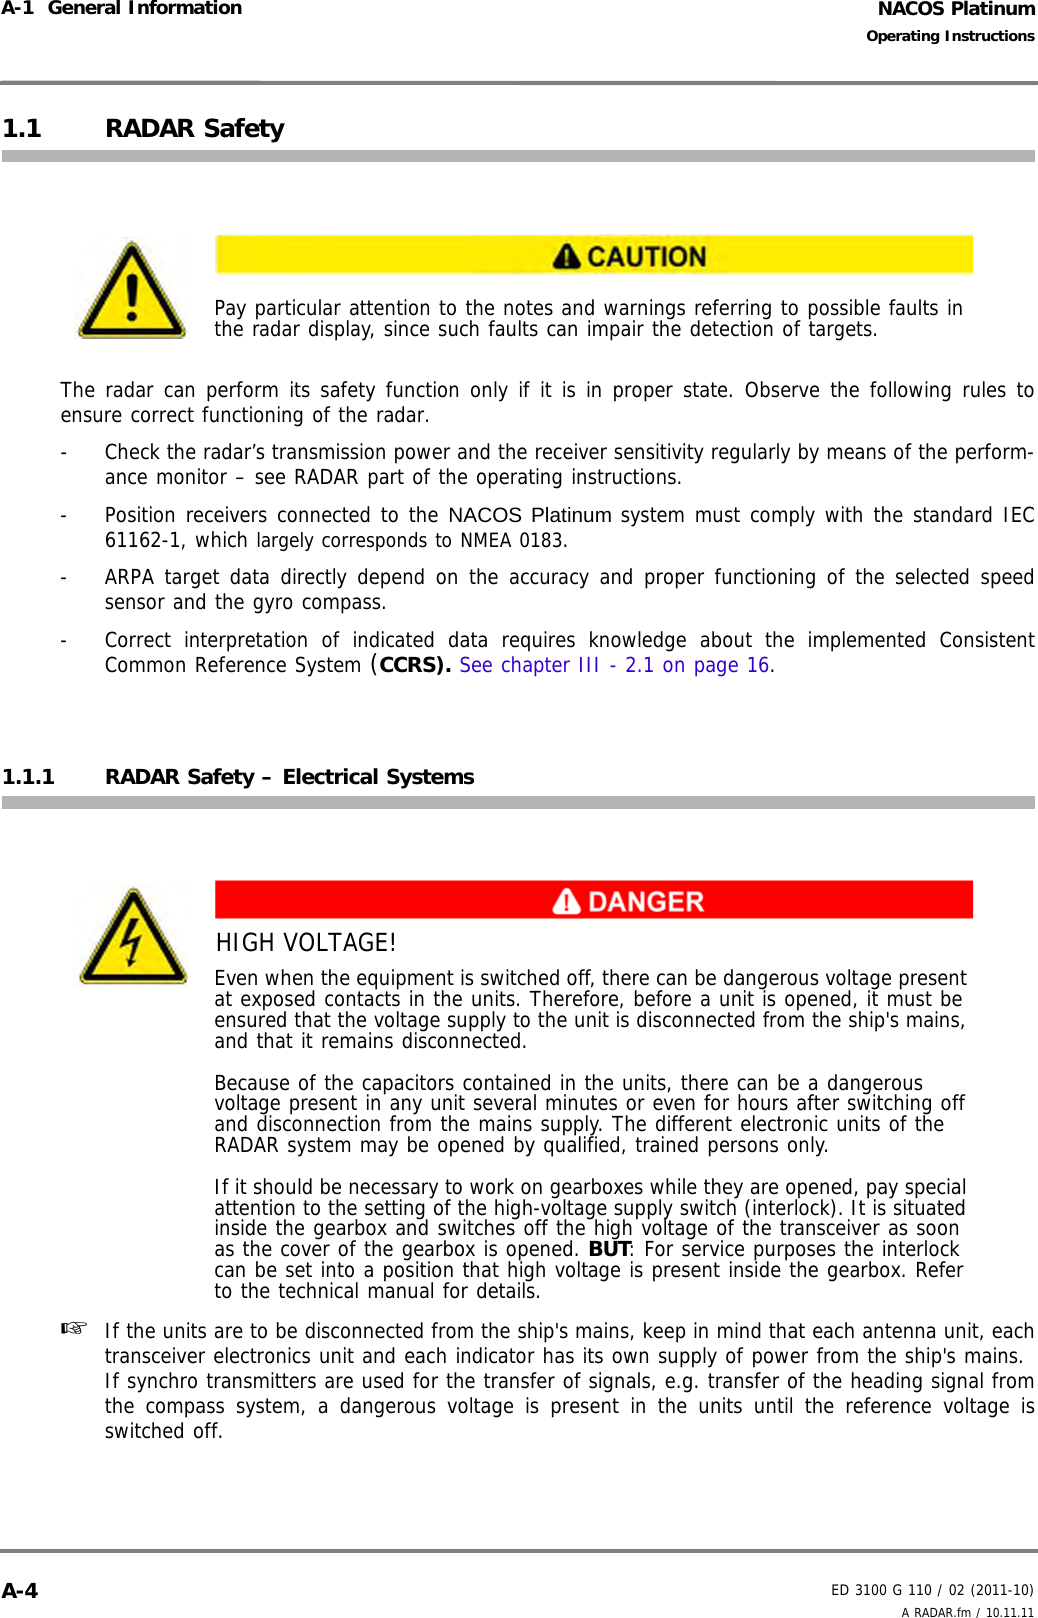 NACOS PlatinumED 3100 G 110 / 02 (2011-10)Operating InstructionsA-1  General Information A RADAR.fm / 10.11.11A-41.1 RADAR SafetyThe radar can perform its safety function only if it is in proper state. Observe the following rules toensure correct functioning of the radar.-  Check the radar’s transmission power and the receiver sensitivity regularly by means of the perform-ance monitor – see RADAR part of the operating instructions.-  Position receivers connected to the NACOS Platinum system must comply with the standard IEC61162-1, which largely corresponds to NMEA 0183.-  ARPA target data directly depend on the accuracy and proper functioning of the selected speedsensor and the gyro compass.- Correct interpretation of indicated data requires knowledge about the implemented ConsistentCommon Reference System (CCRS). See chapter III - 2.1 on page 16.1.1.1 RADAR Safety – Electrical Systems☞  If the units are to be disconnected from the ship&apos;s mains, keep in mind that each antenna unit, eachtransceiver electronics unit and each indicator has its own supply of power from the ship&apos;s mains.If synchro transmitters are used for the transfer of signals, e.g. transfer of the heading signal fromthe compass system, a dangerous voltage is present in the units until the reference voltage isswitched off.Pay particular attention to the notes and warnings referring to possible faults in the radar display, since such faults can impair the detection of targets.HIGH VOLTAGE!Even when the equipment is switched off, there can be dangerous voltage present at exposed contacts in the units. Therefore, before a unit is opened, it must be ensured that the voltage supply to the unit is disconnected from the ship&apos;s mains, and that it remains disconnected.Because of the capacitors contained in the units, there can be a dangerous voltage present in any unit several minutes or even for hours after switching off and disconnection from the mains supply. The different electronic units of the RADAR system may be opened by qualified, trained persons only.If it should be necessary to work on gearboxes while they are opened, pay special attention to the setting of the high-voltage supply switch (interlock). It is situated inside the gearbox and switches off the high voltage of the transceiver as soon as the cover of the gearbox is opened. BUT: For service purposes the interlock can be set into a position that high voltage is present inside the gearbox. Refer to the technical manual for details.